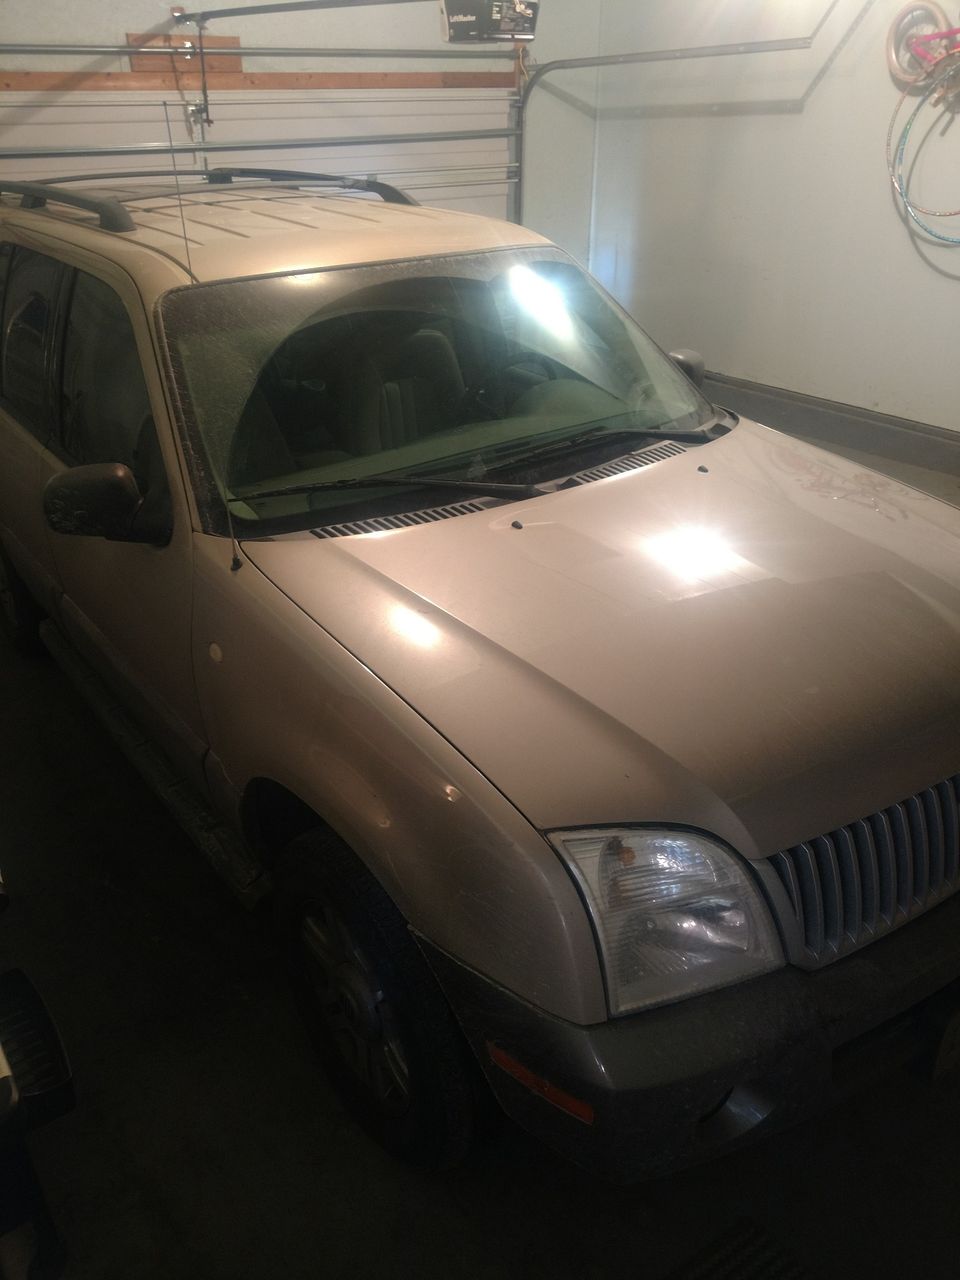 2004 Mercury Mountaineer | Sioux Falls, SD, Mineral Grey Clearcoat Metallic/Light French Silk Metallic (Gray)